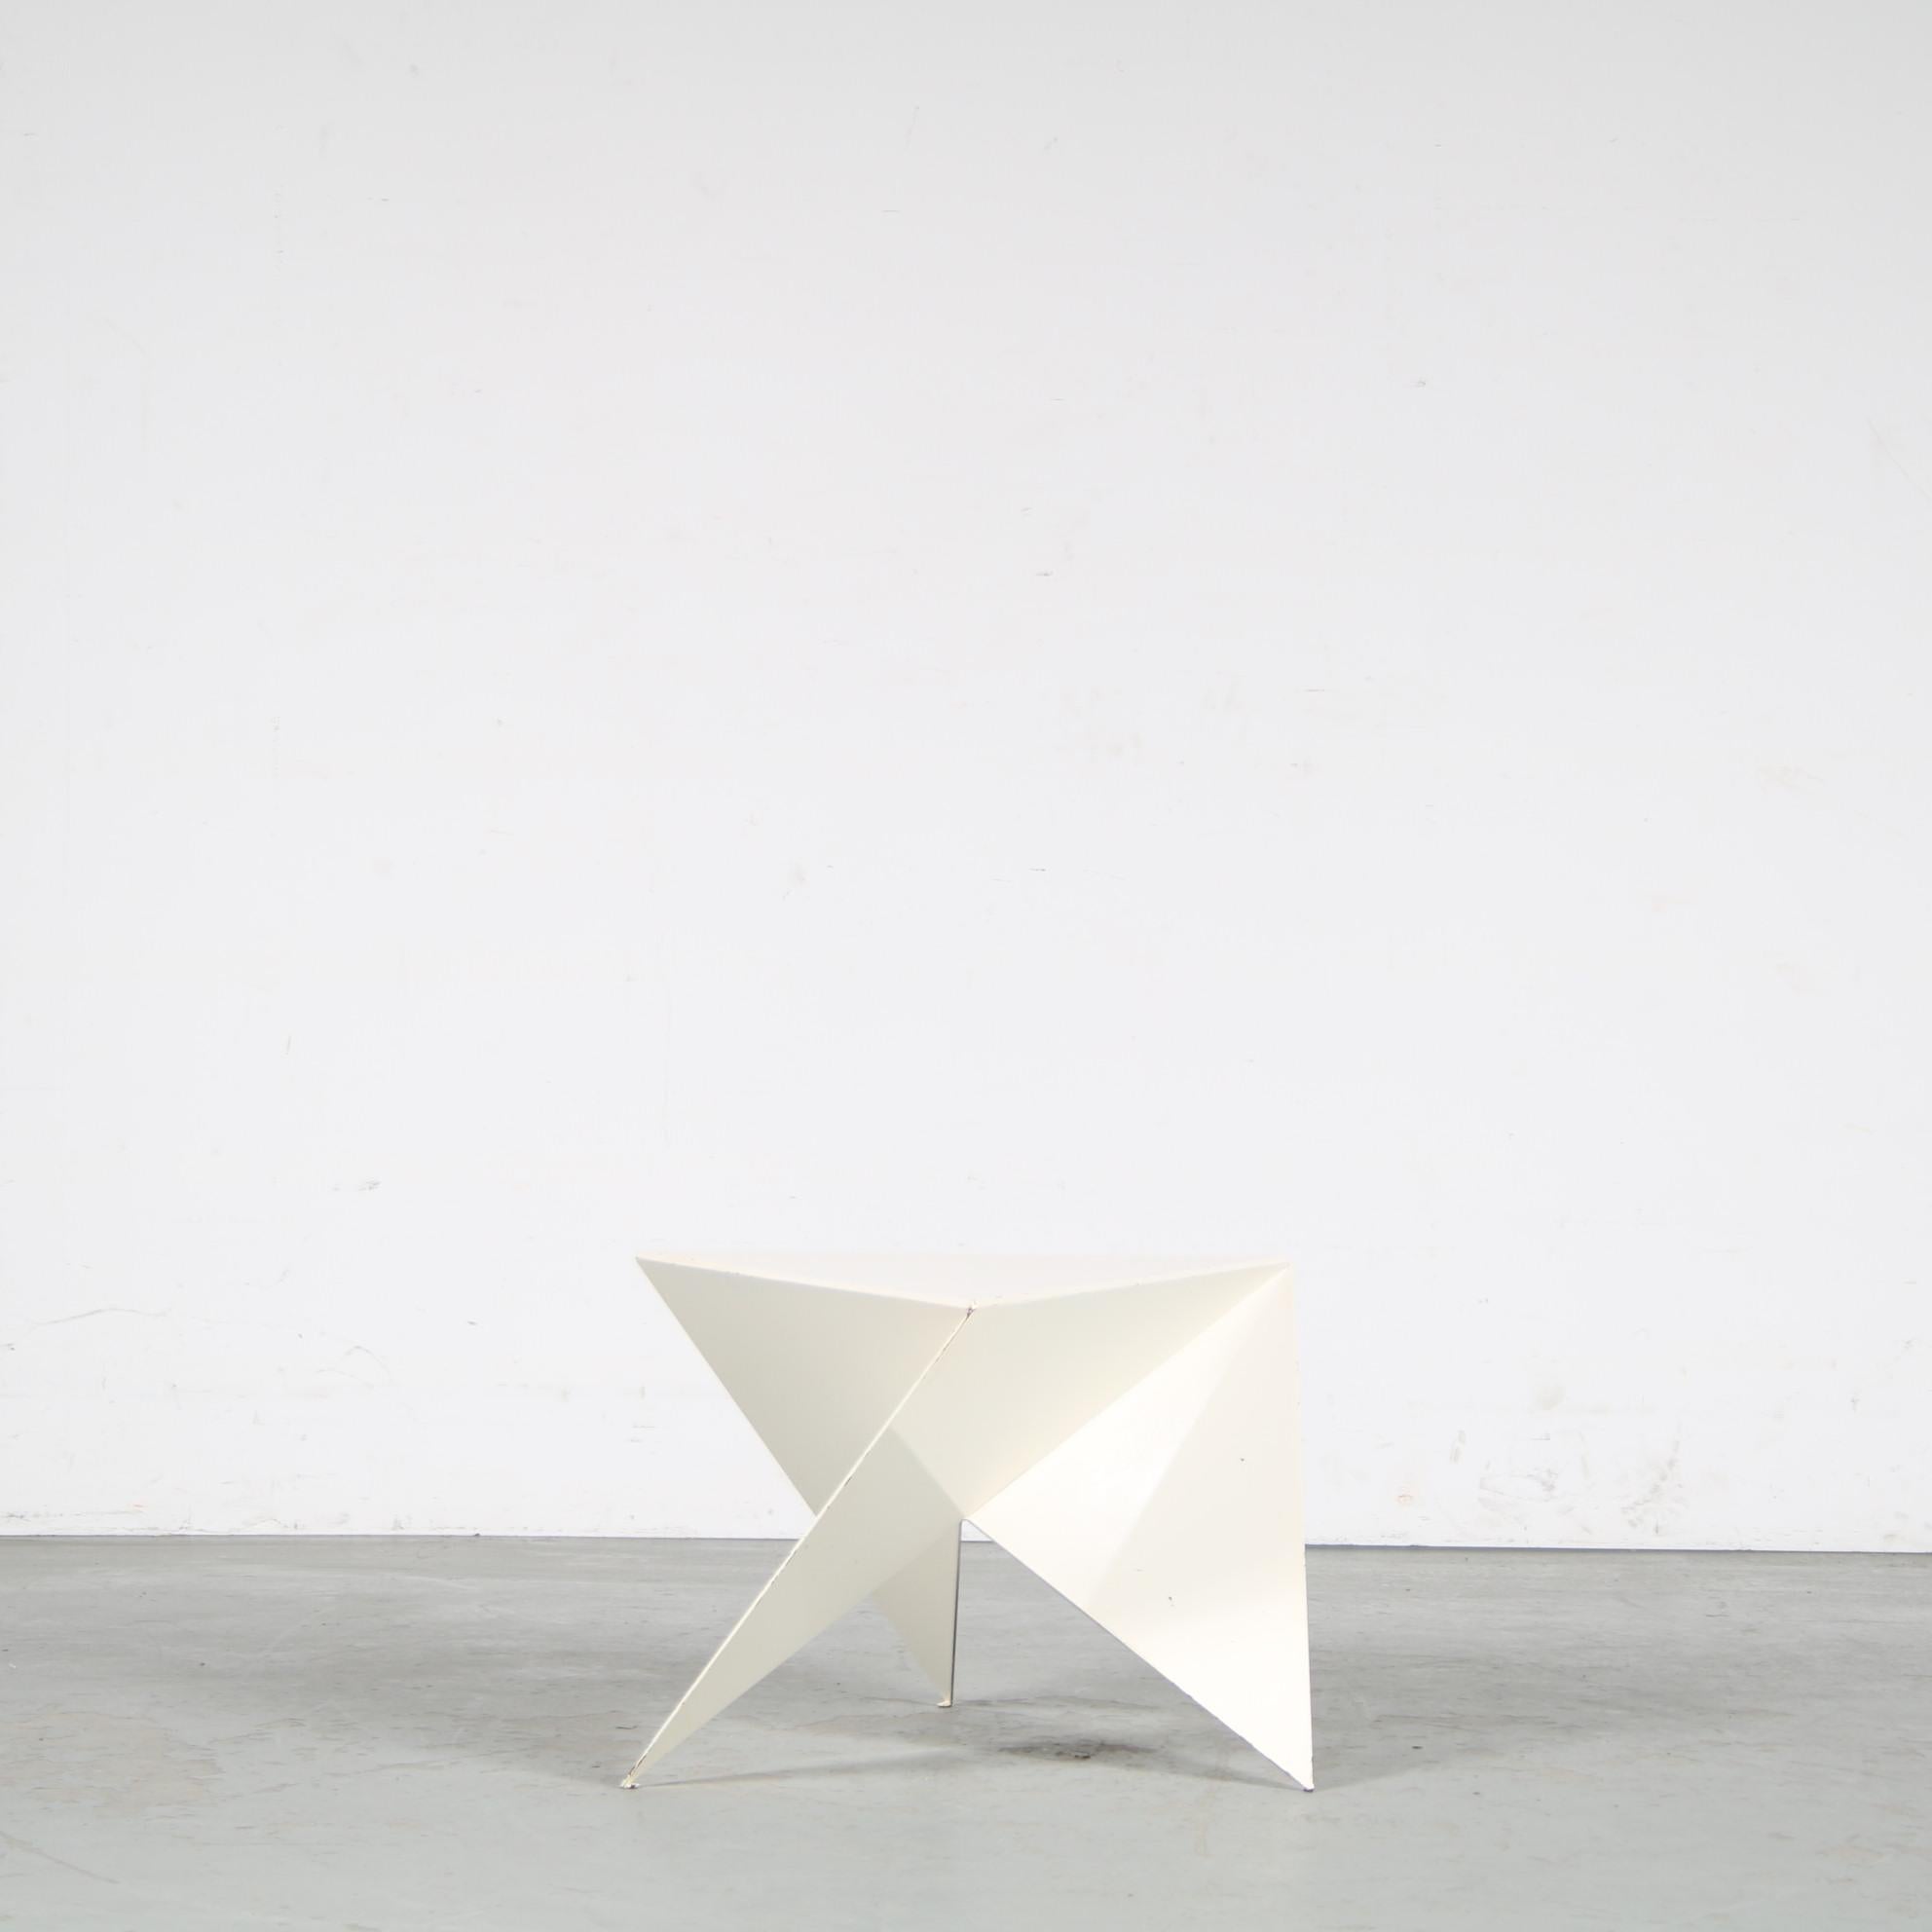 An eye-catching metal side table designed by Ronald Willemsen, manufactured by Metaform in the Netherlands around 1980.

The piece has a unique triangular, origami like shape. This makes the table a wonderful addition to the decor, adding a nice